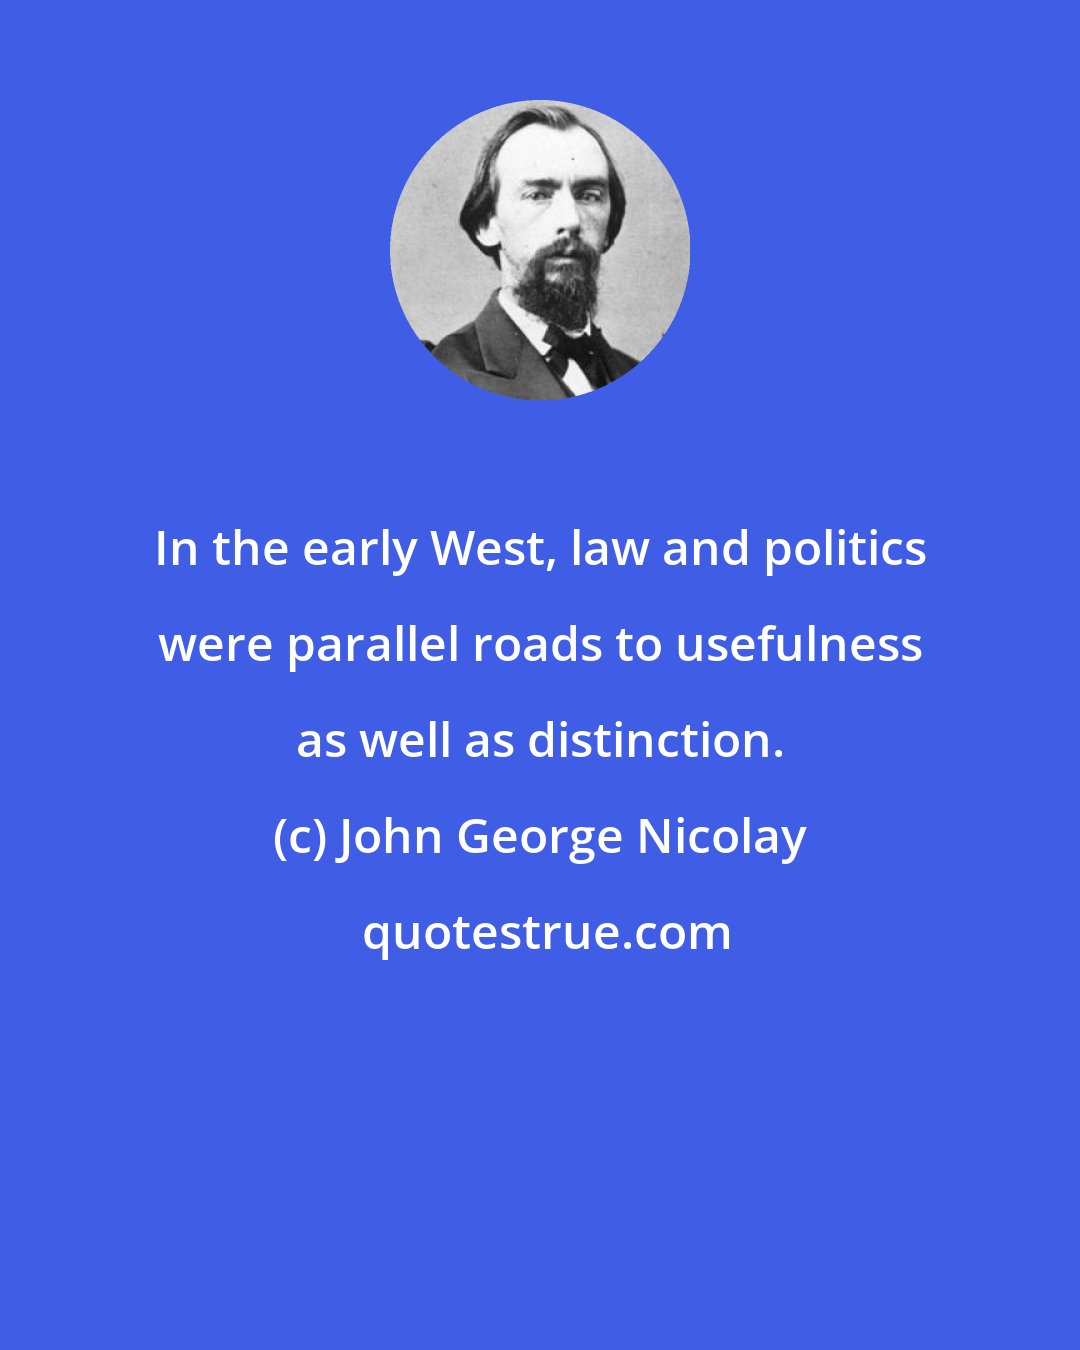 John George Nicolay: In the early West, law and politics were parallel roads to usefulness as well as distinction.